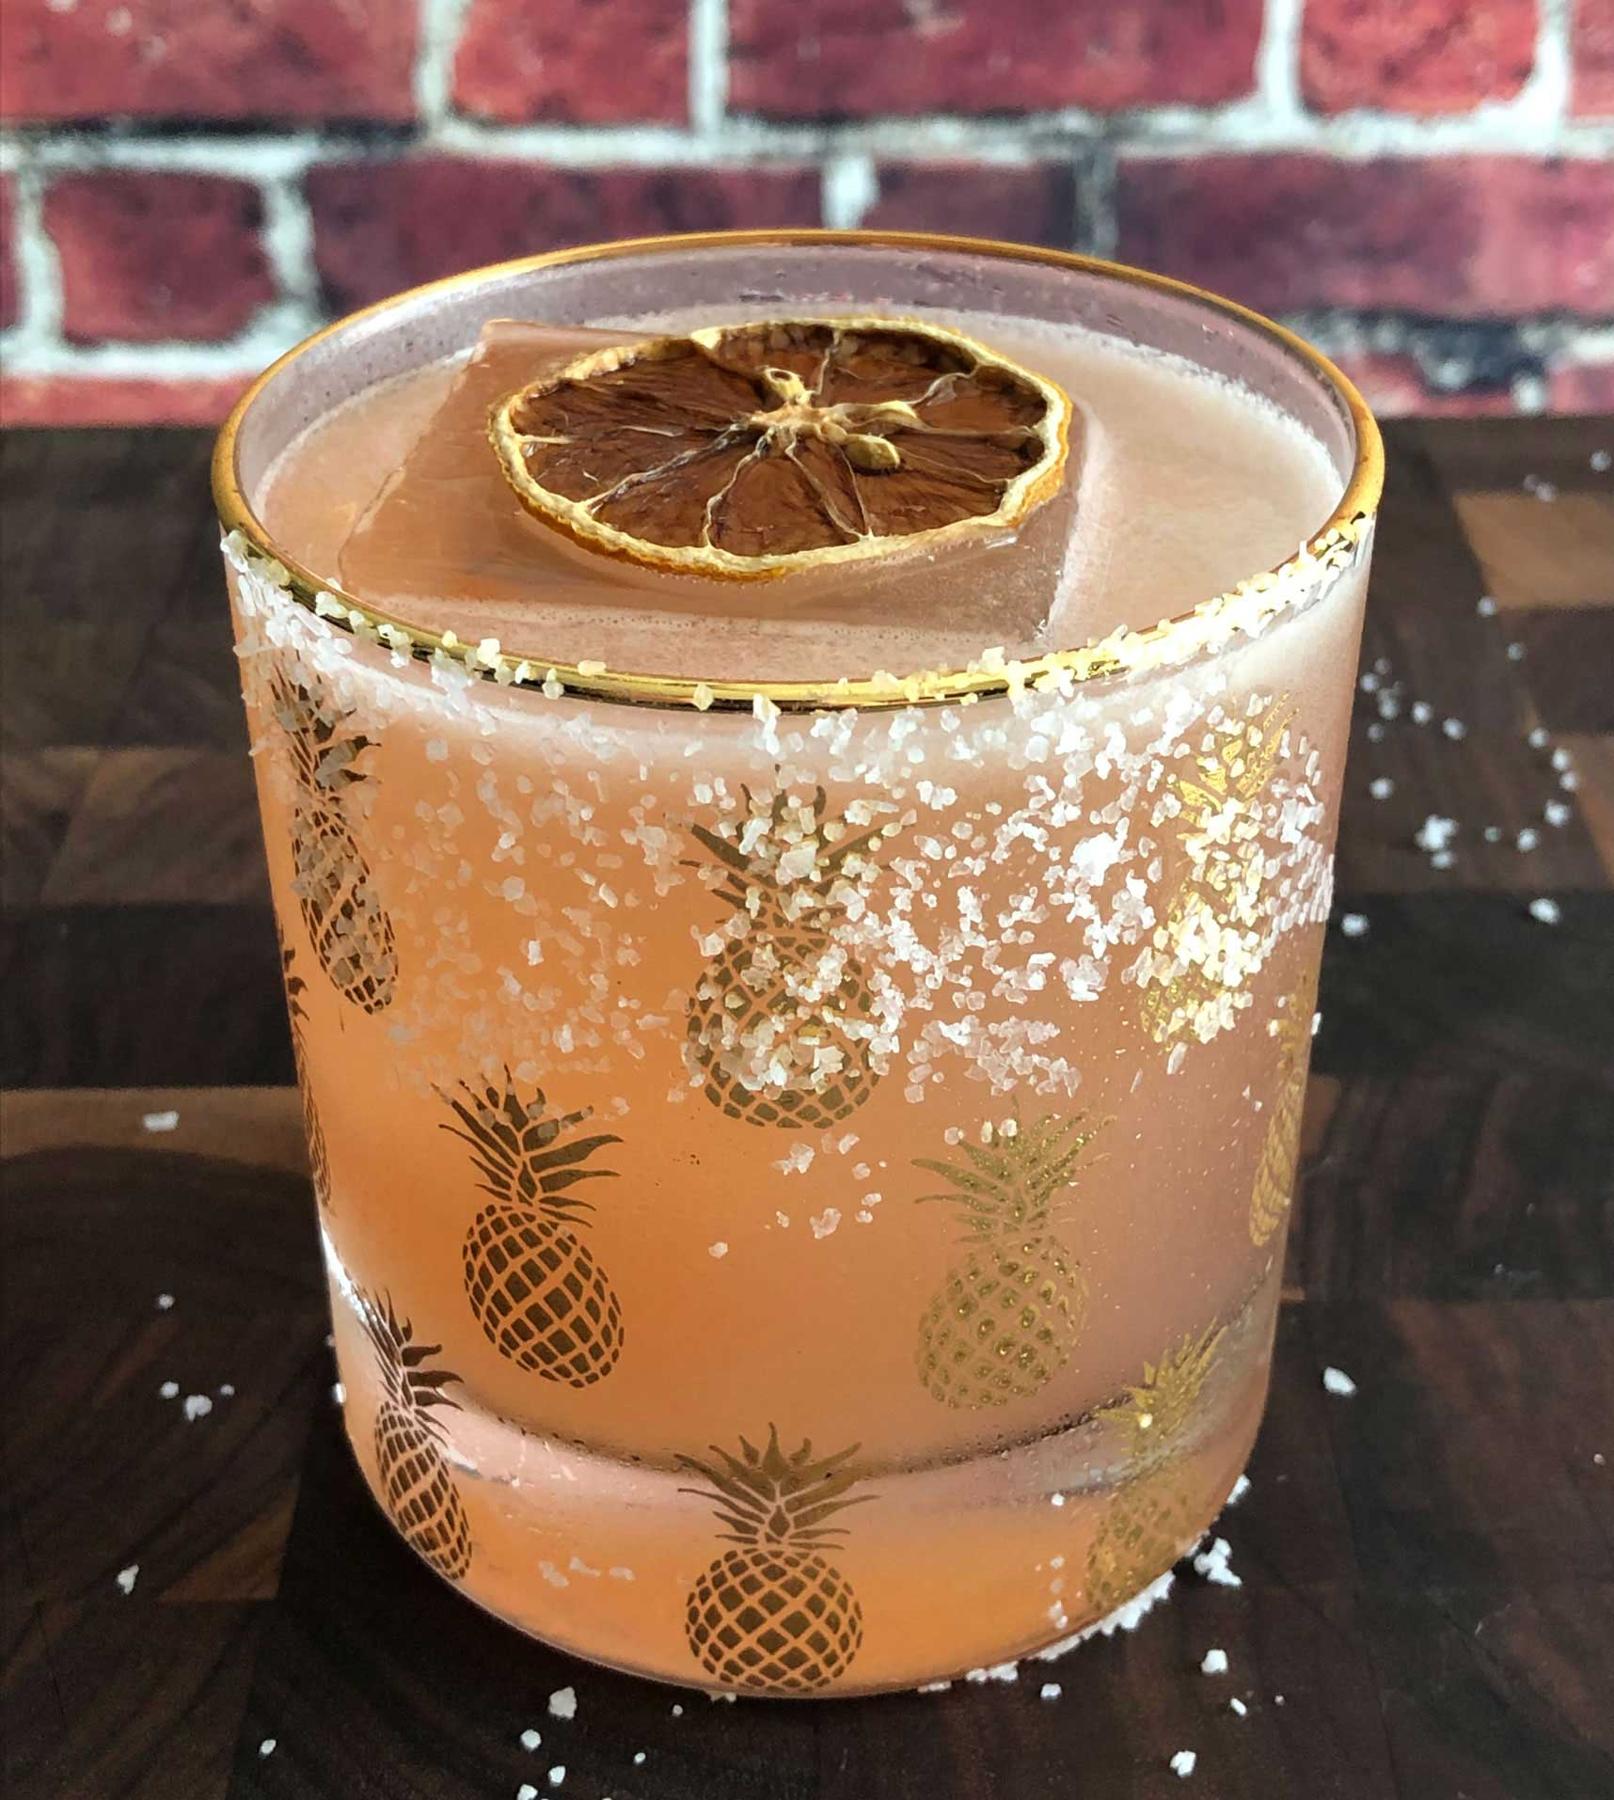 An example of the Culomba, the mixed drink (drink), by Jared Sadoian, The Hawthorne, Boston, MA, featuring Mattei Cap Corse Blanc Quinquina, grapefruit juice, blanco tequila, and salt; photo by Lee Edwards